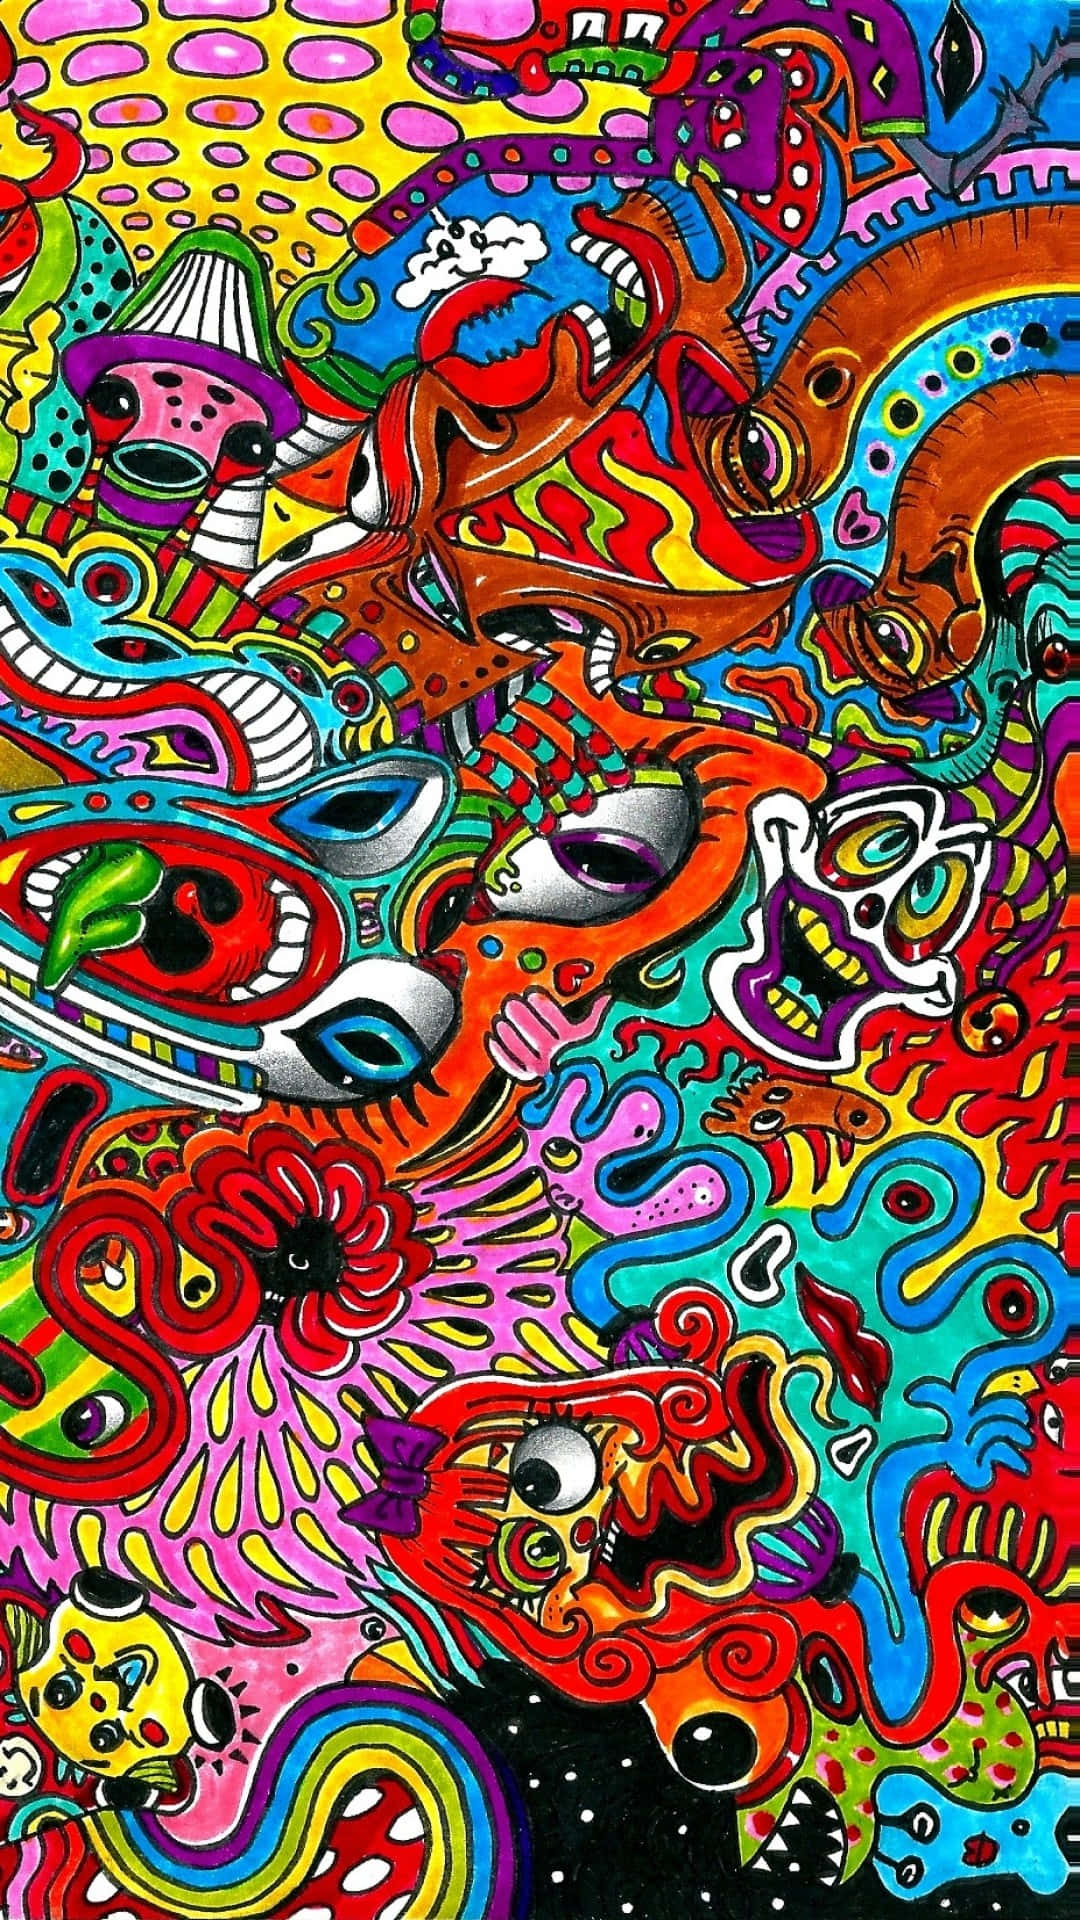 Unlock your imagination with this vibrant psychedelic artwork